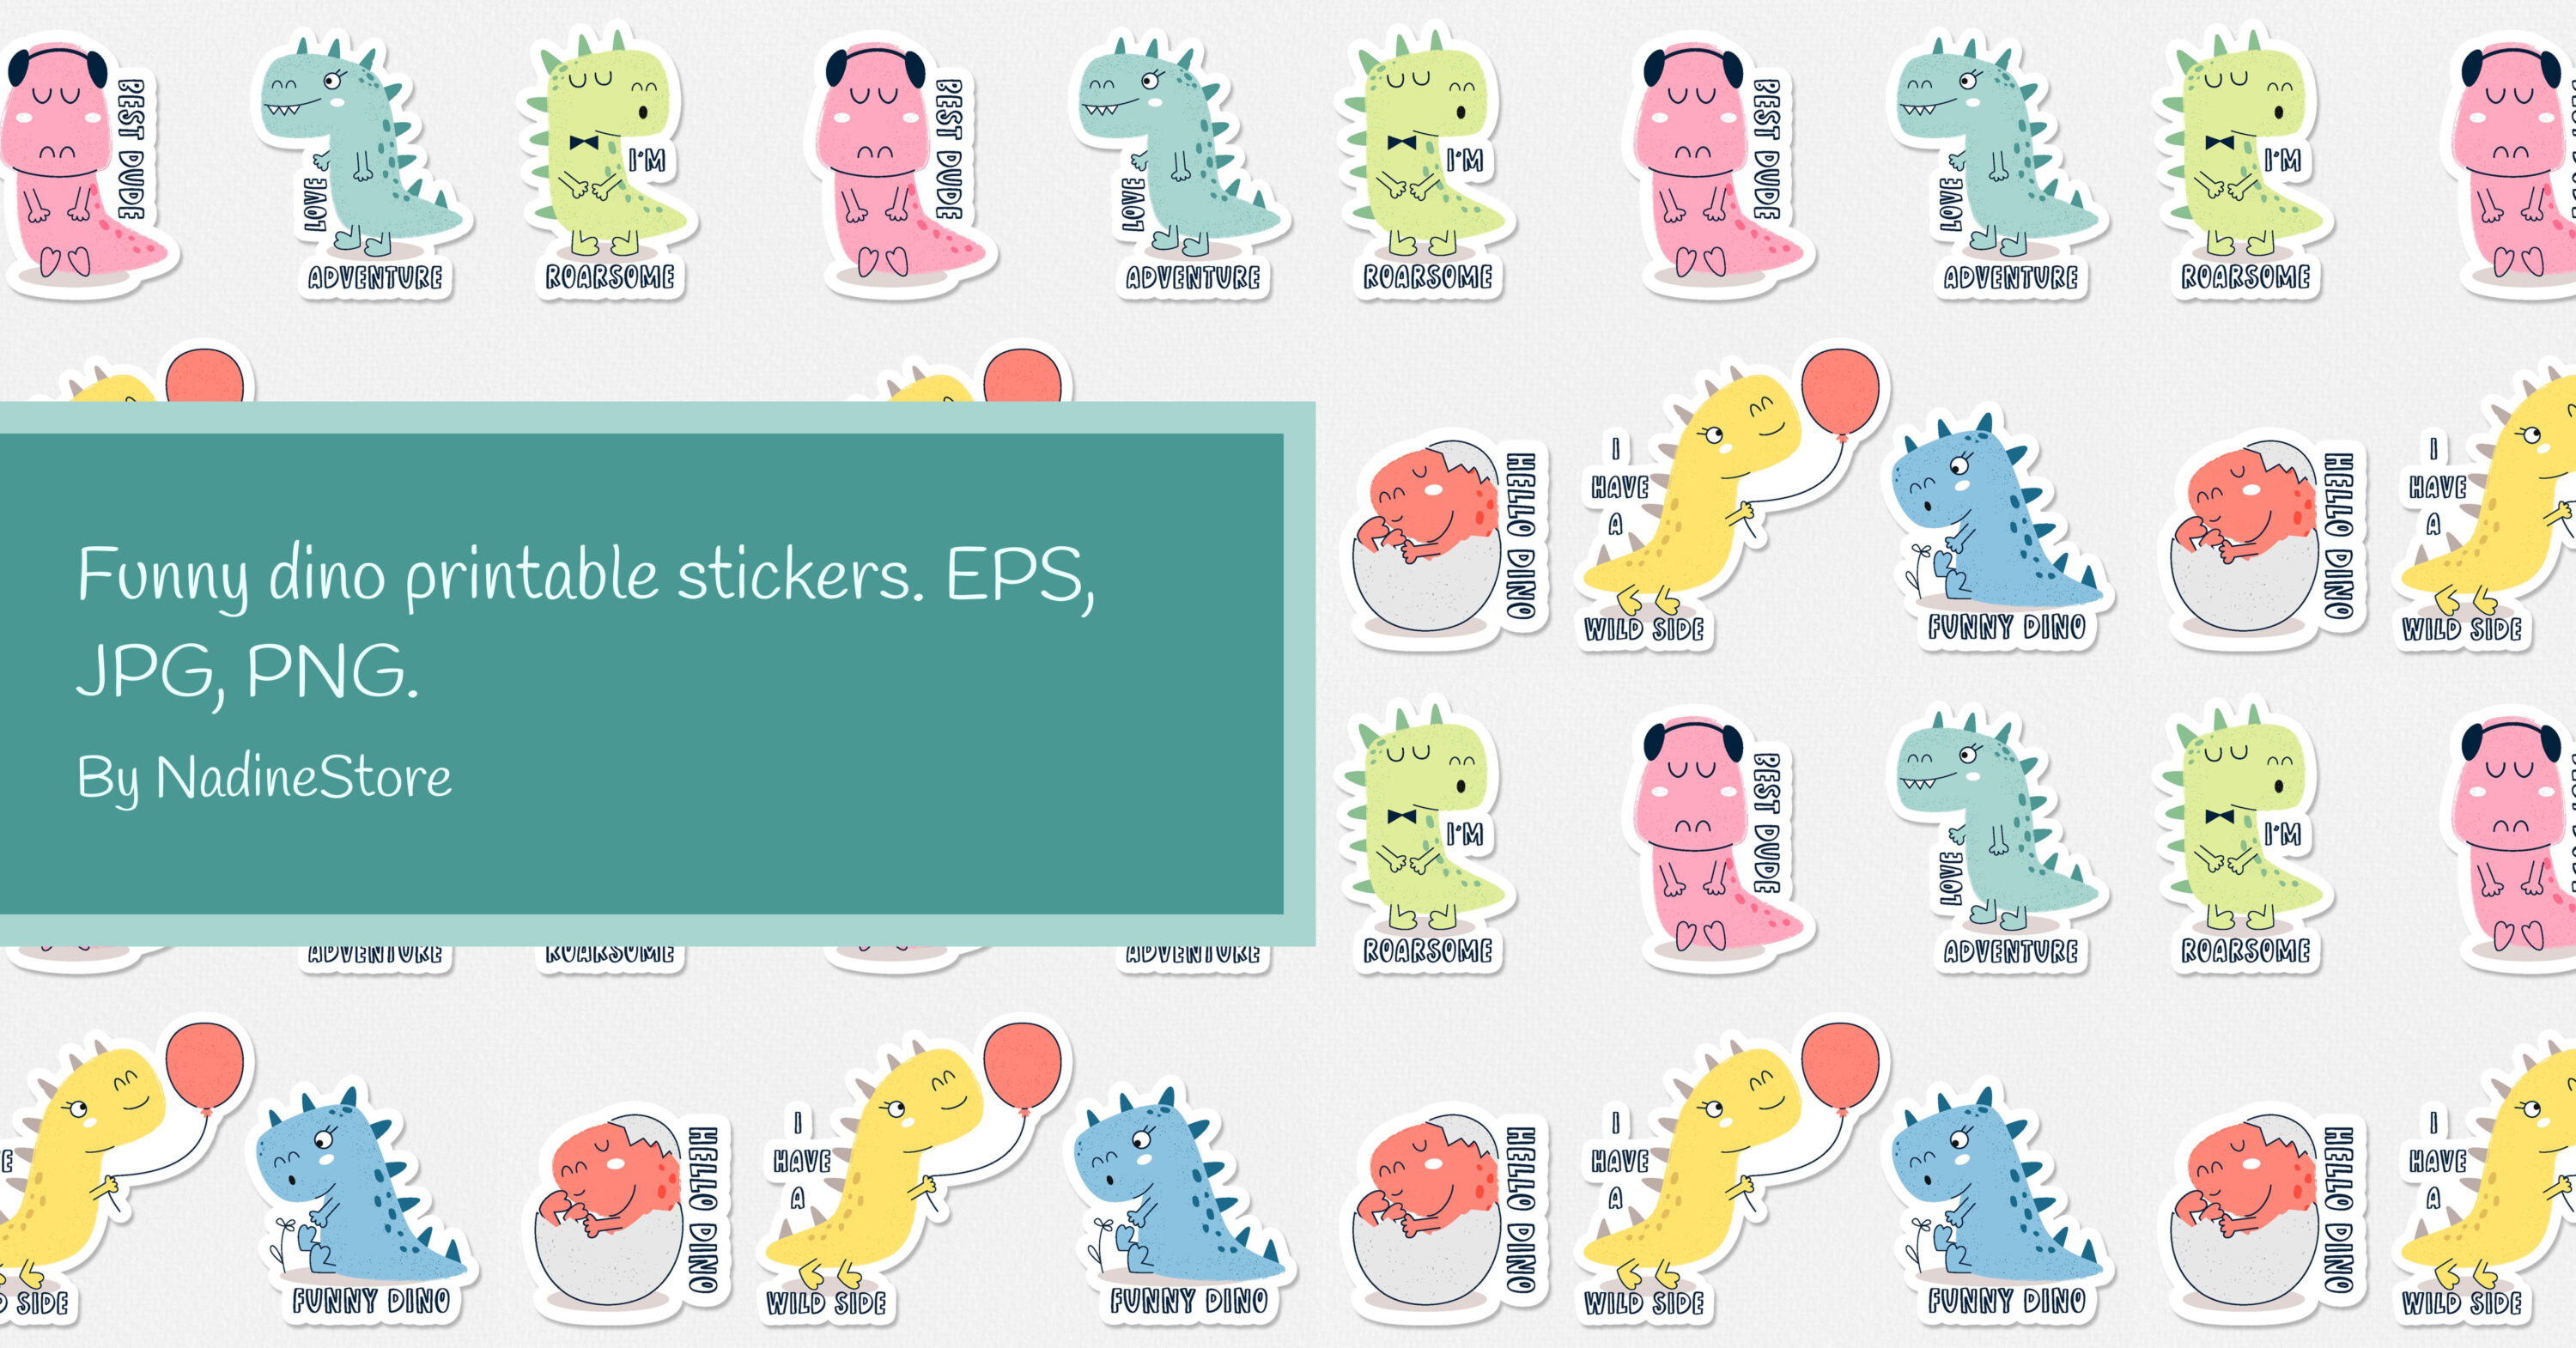 Funny dino printable stickers for facebook.